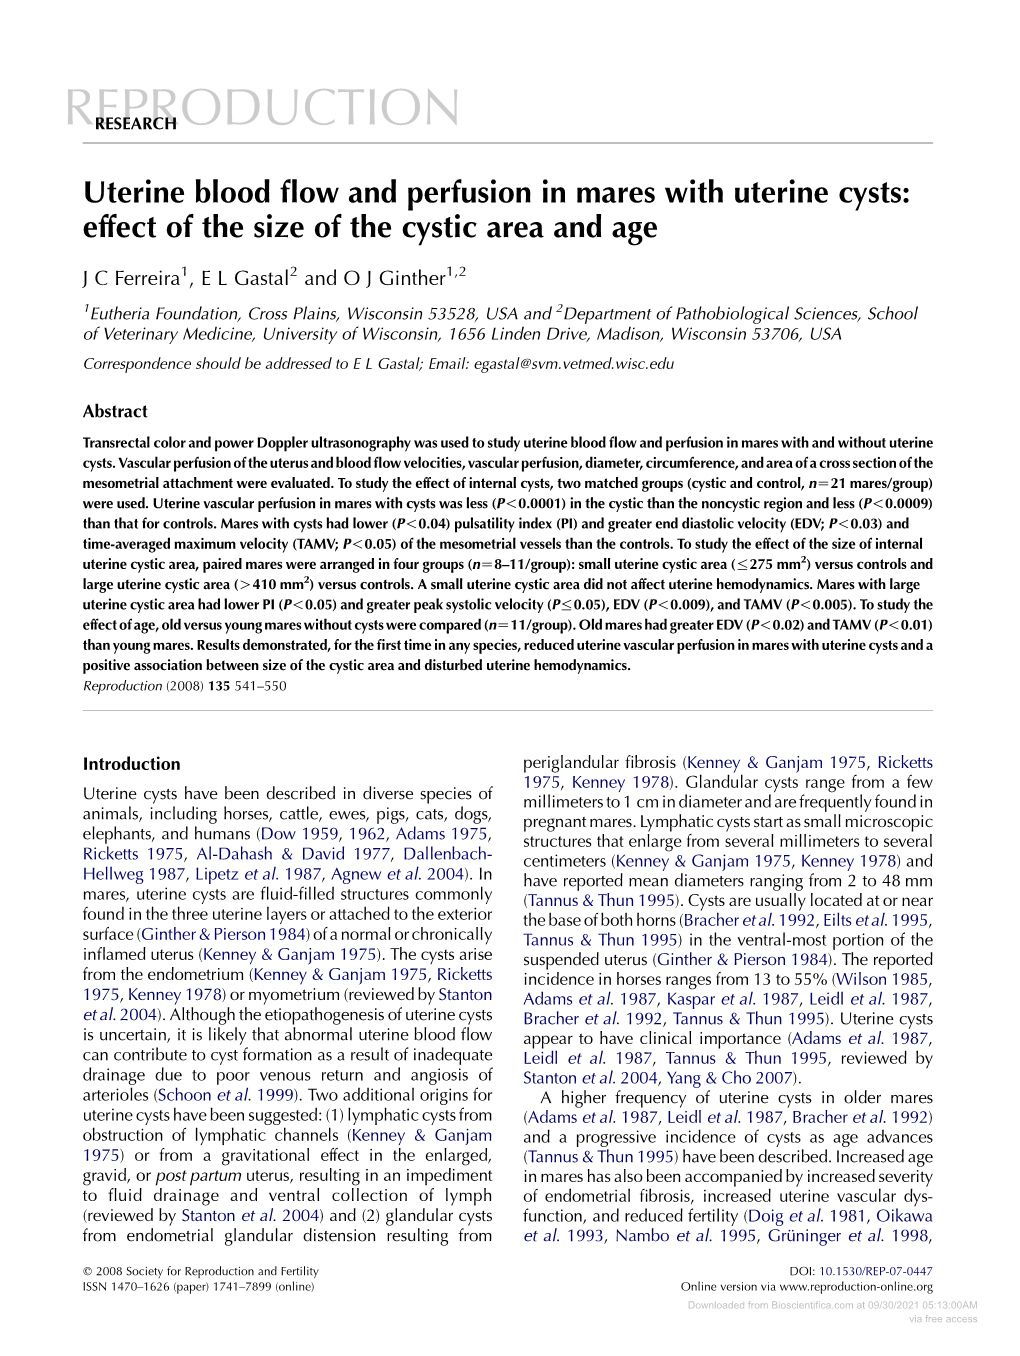 Uterine Blood Flow and Perfusion in Mares with Uterine Cysts